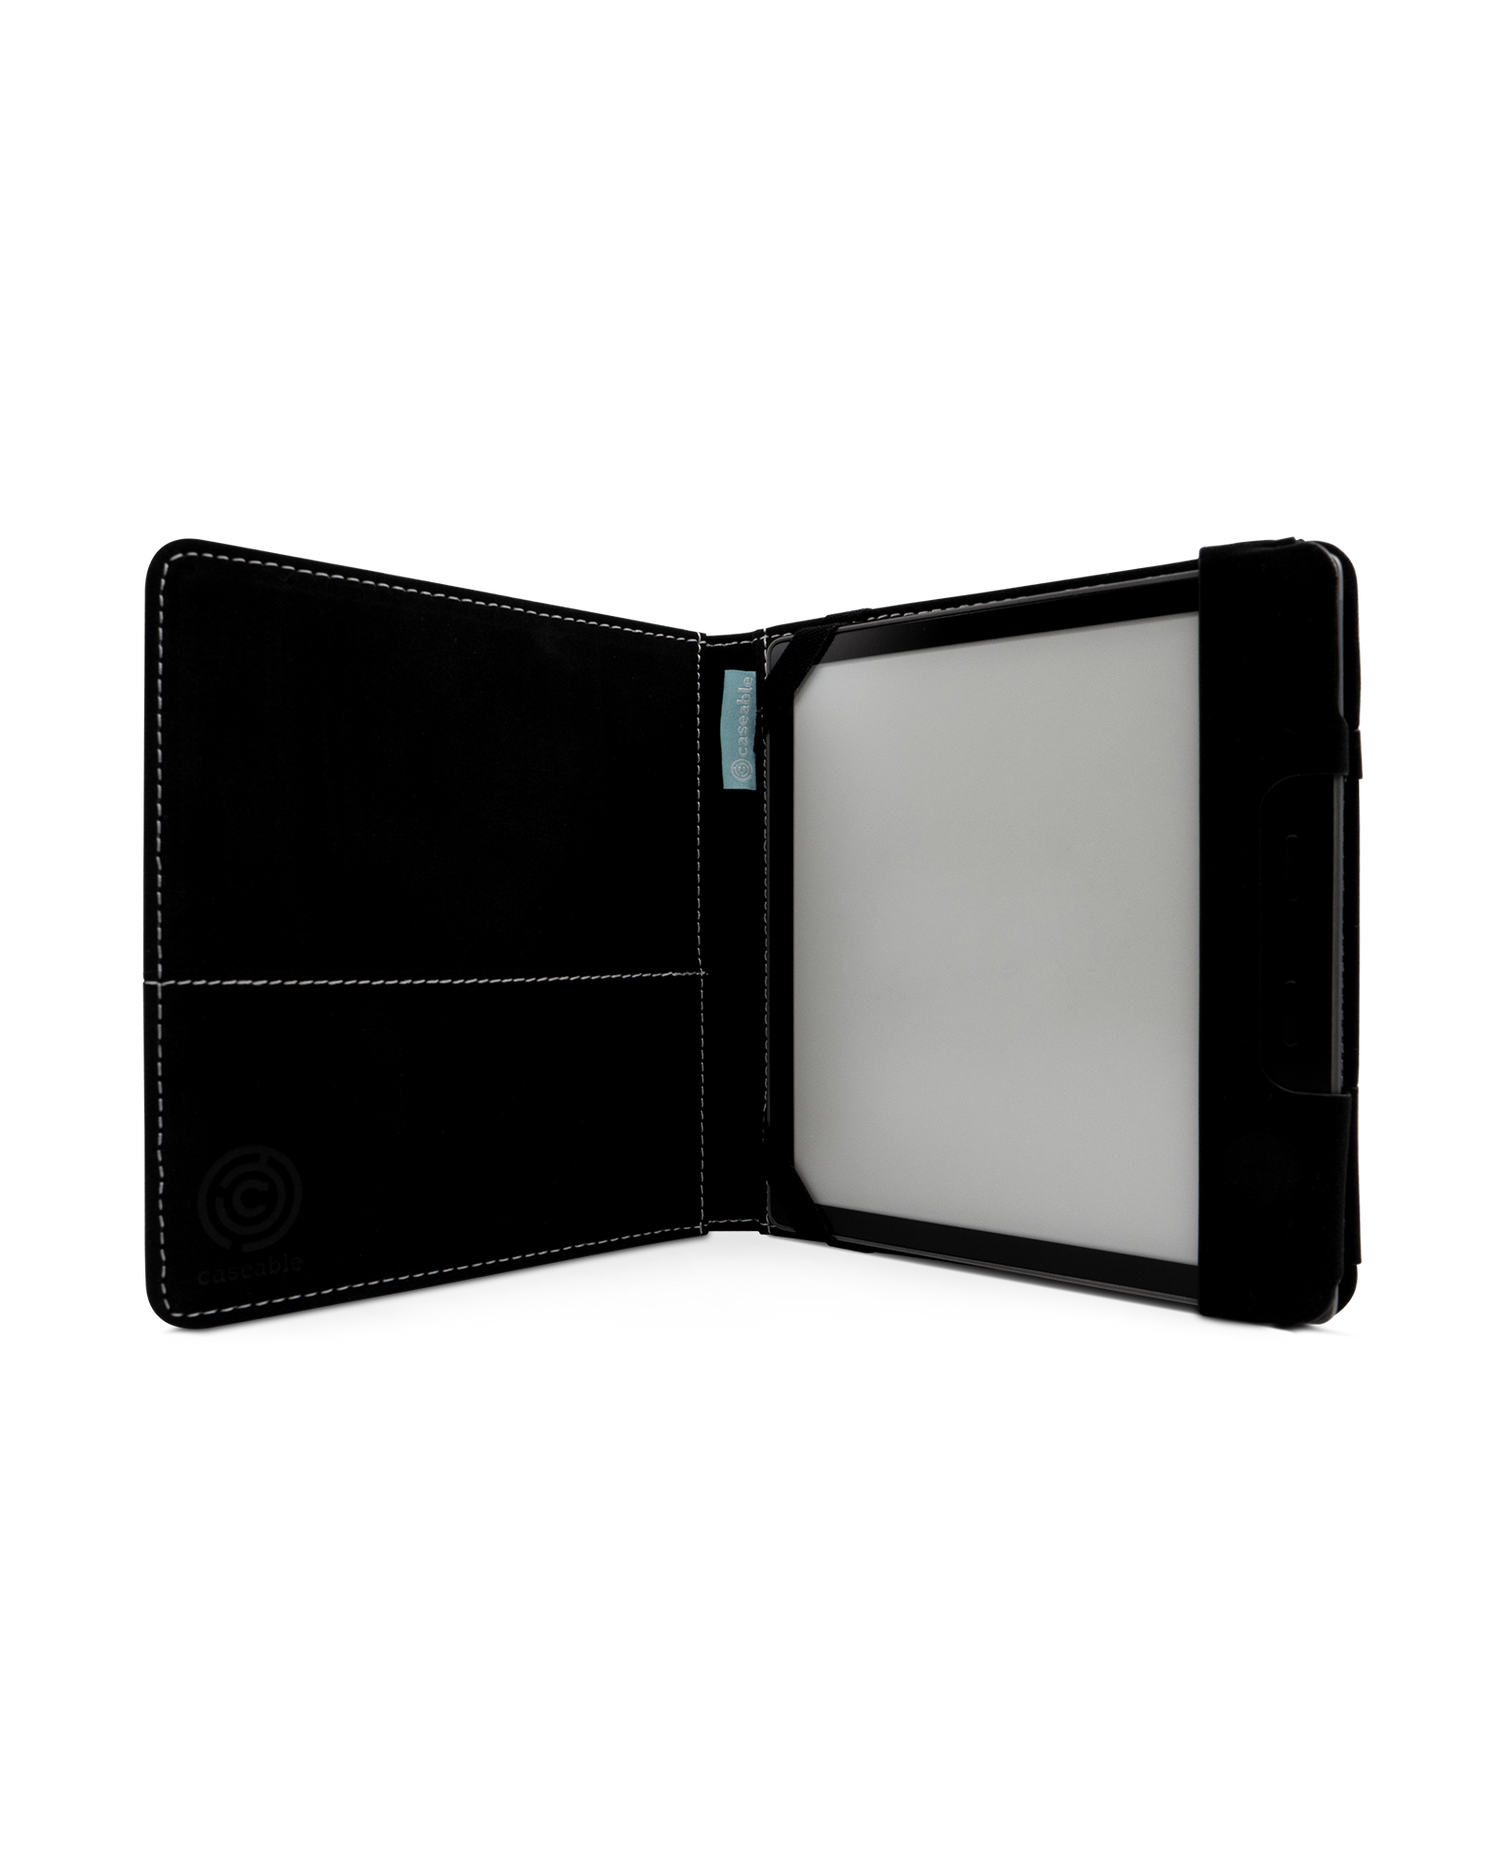 Black and White eReader Case for tolino vision 6: Opened interior view